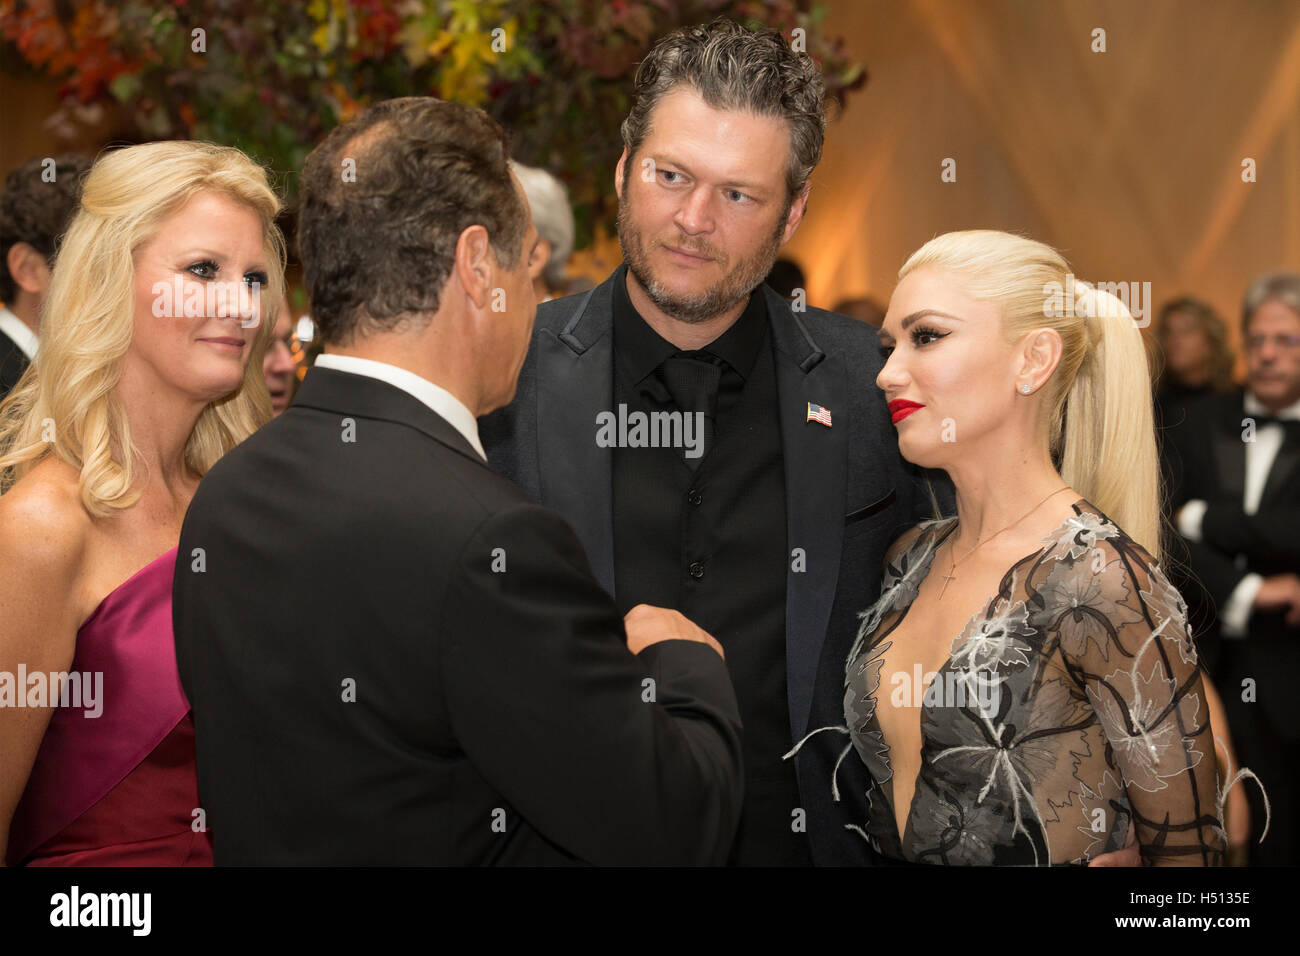 US entertainer Gwen Stefani (R), US entertainer Blake Shelton (2-R), New York Governor Andrew Cuomo (2-L) and US chef and author Sandra Lee (L) attend a state dinner for Italian Prime Minister Matteo Renzi, hosted by US President Barack Obama, on the South Lawn of the White House in Washington DC, USA, 18 October 2016. President Obama hosts his final state dinner, featuring celebrity chef Mario Batali and singer Gwen Stefani performing after dinner. Credit: Michael Reynolds/Pool via CNP/MediaPunch Stock Photo